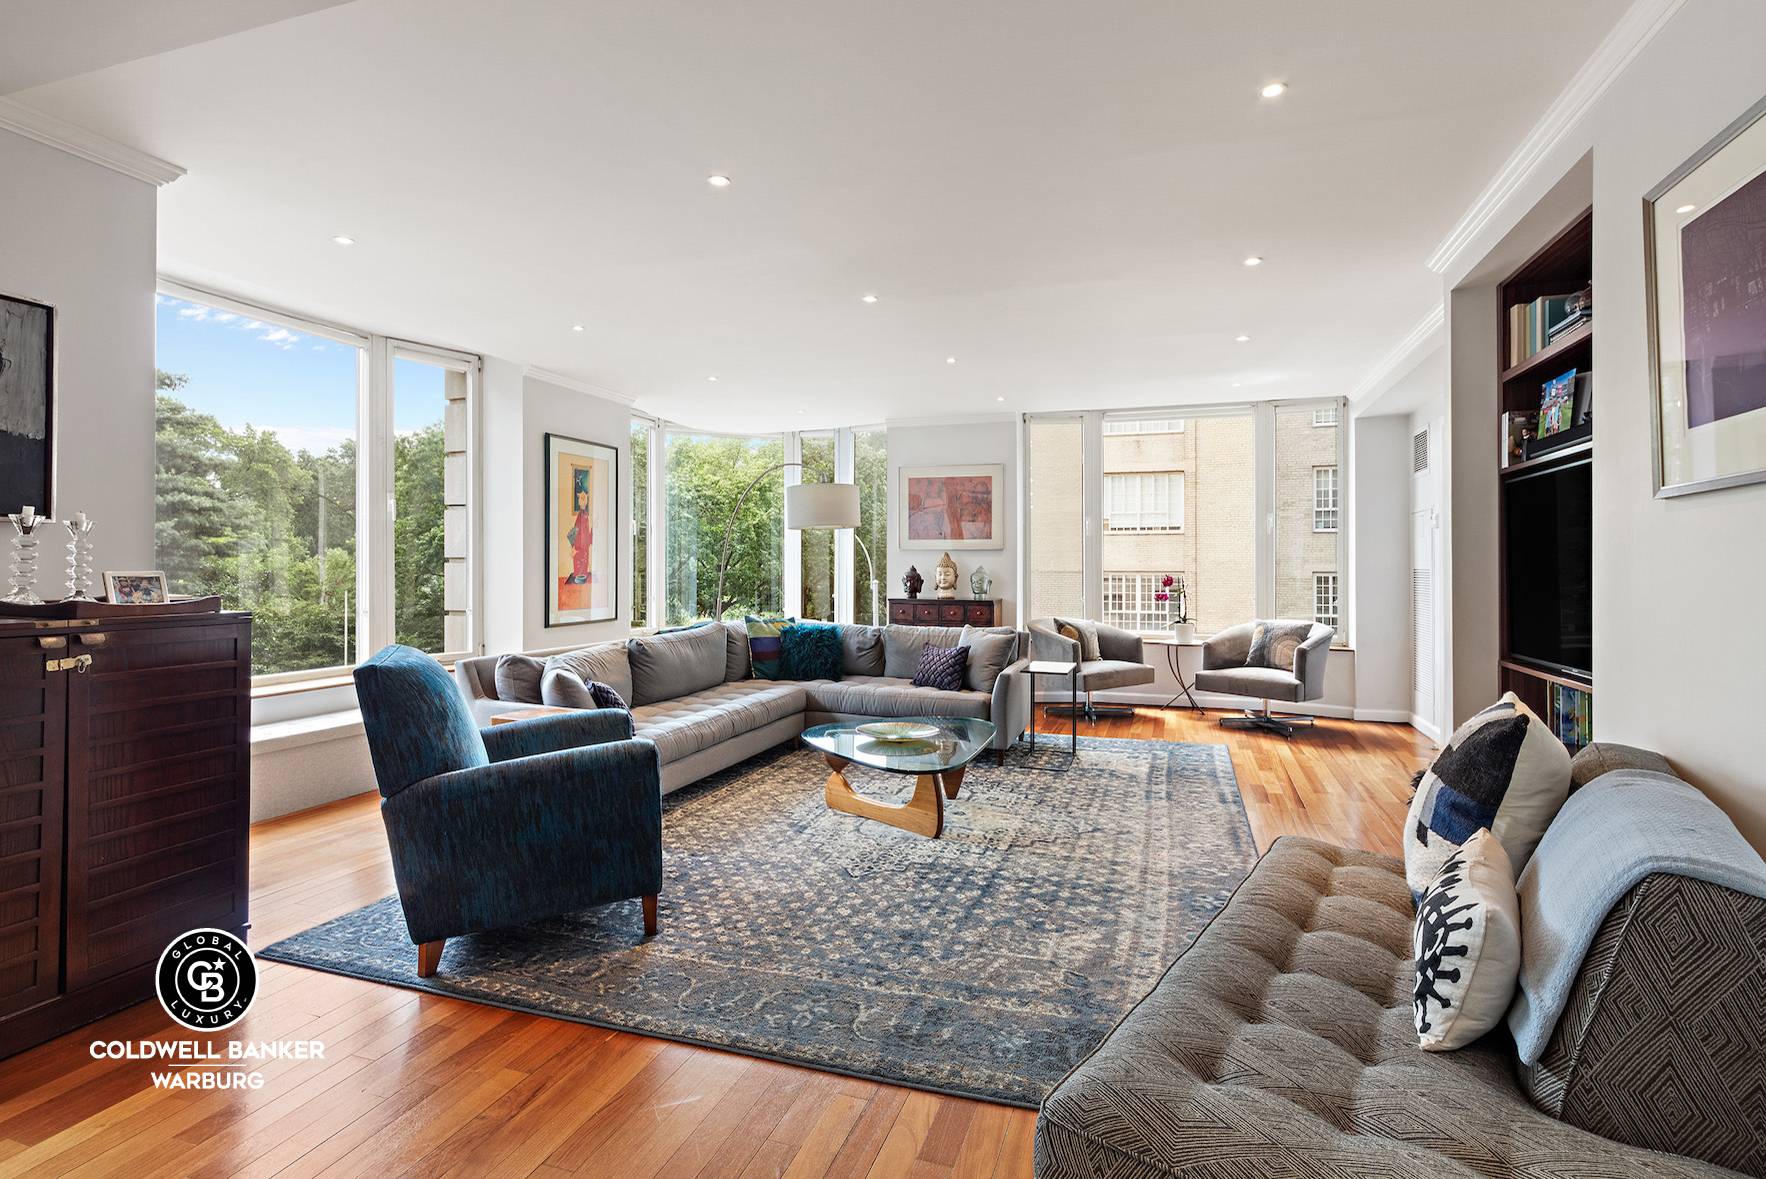 Central Park views from every window of this beautifully renovated, sprawling 3 bedroom, 3.